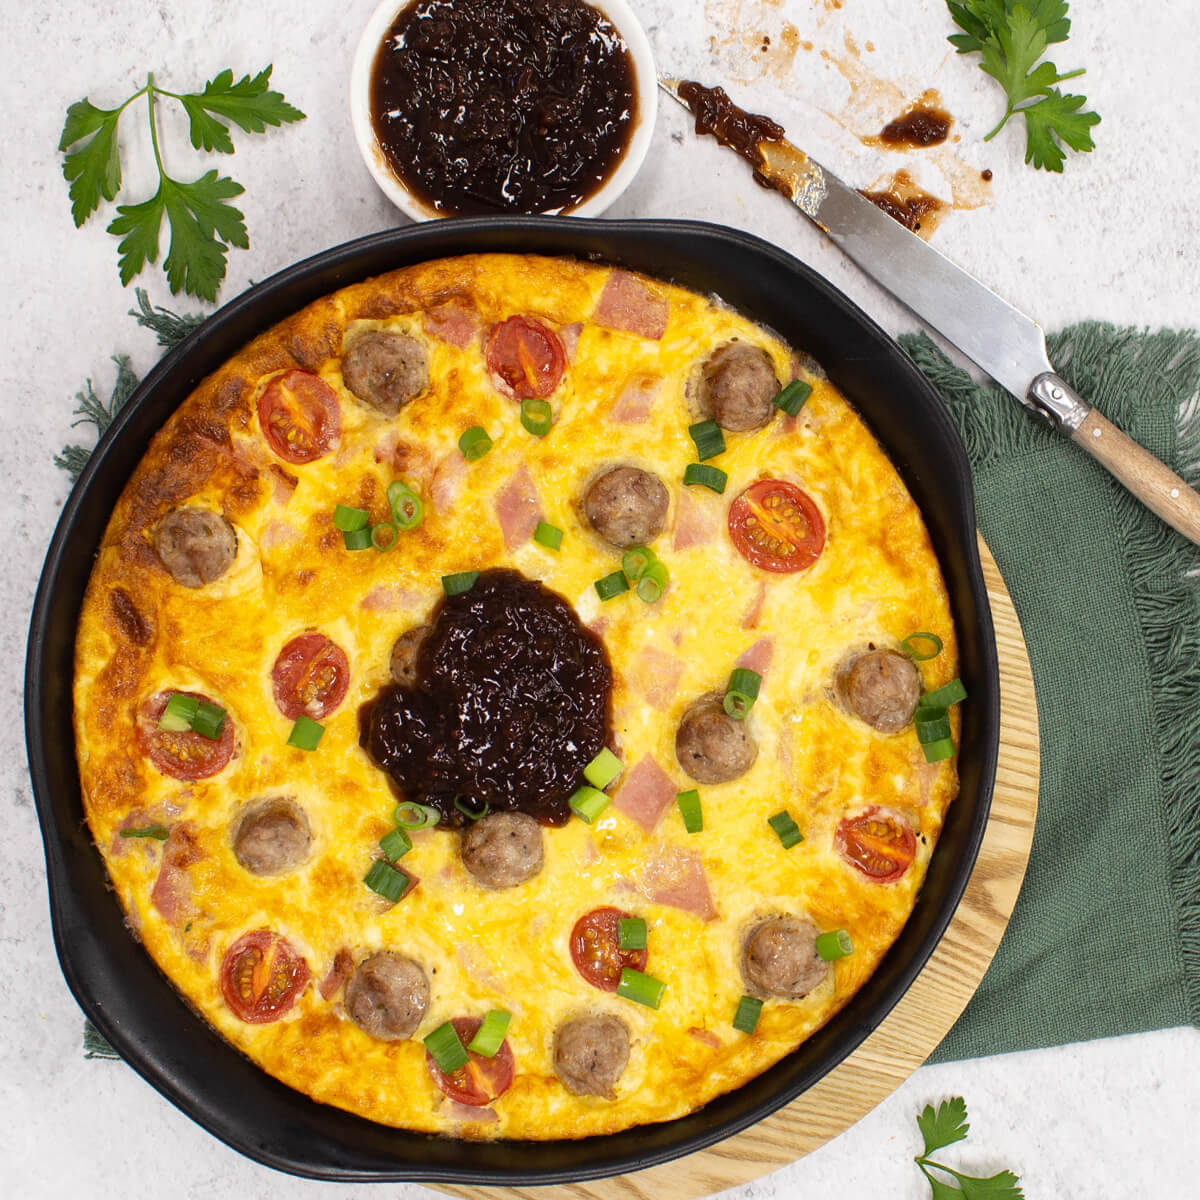 Spicy Sicilian Sausage Omelet